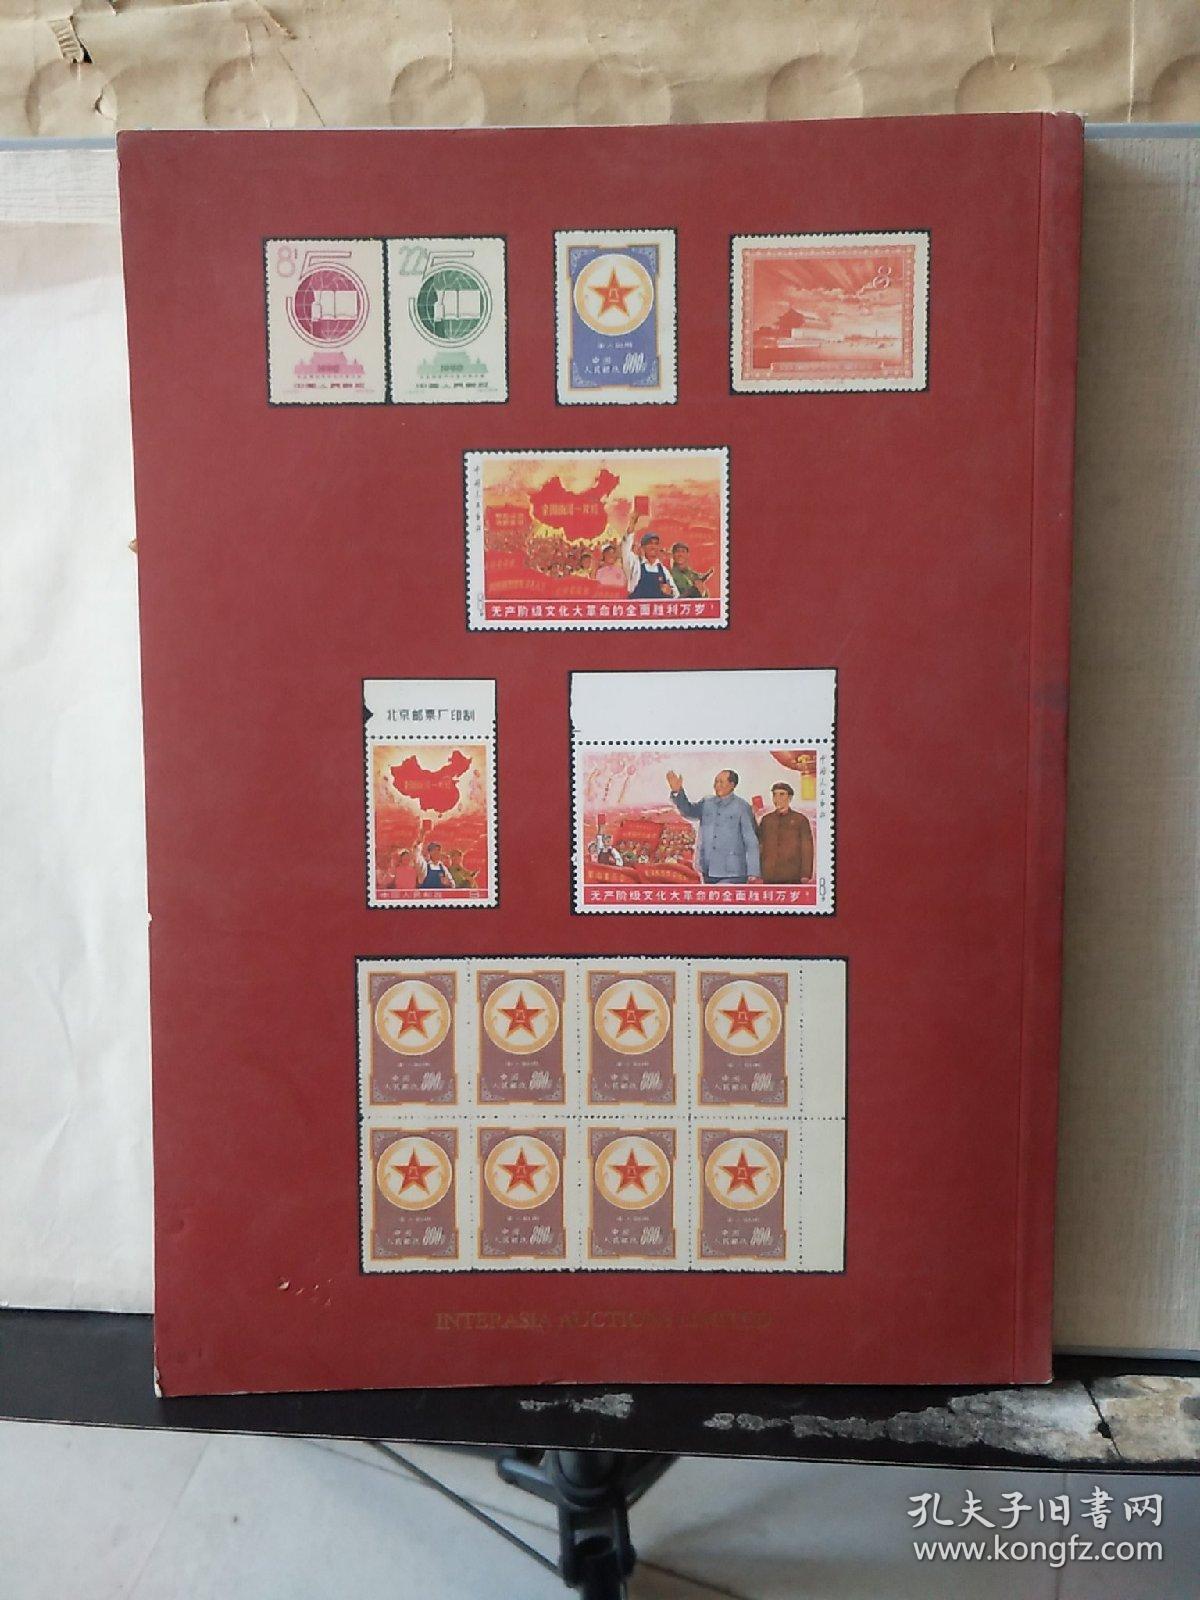 INTERASIA AUCTIONS LIMITED：The Stamps and Postal History of The People's Republic of China and Liberated Areas （Hong Kong January 12, 2014）